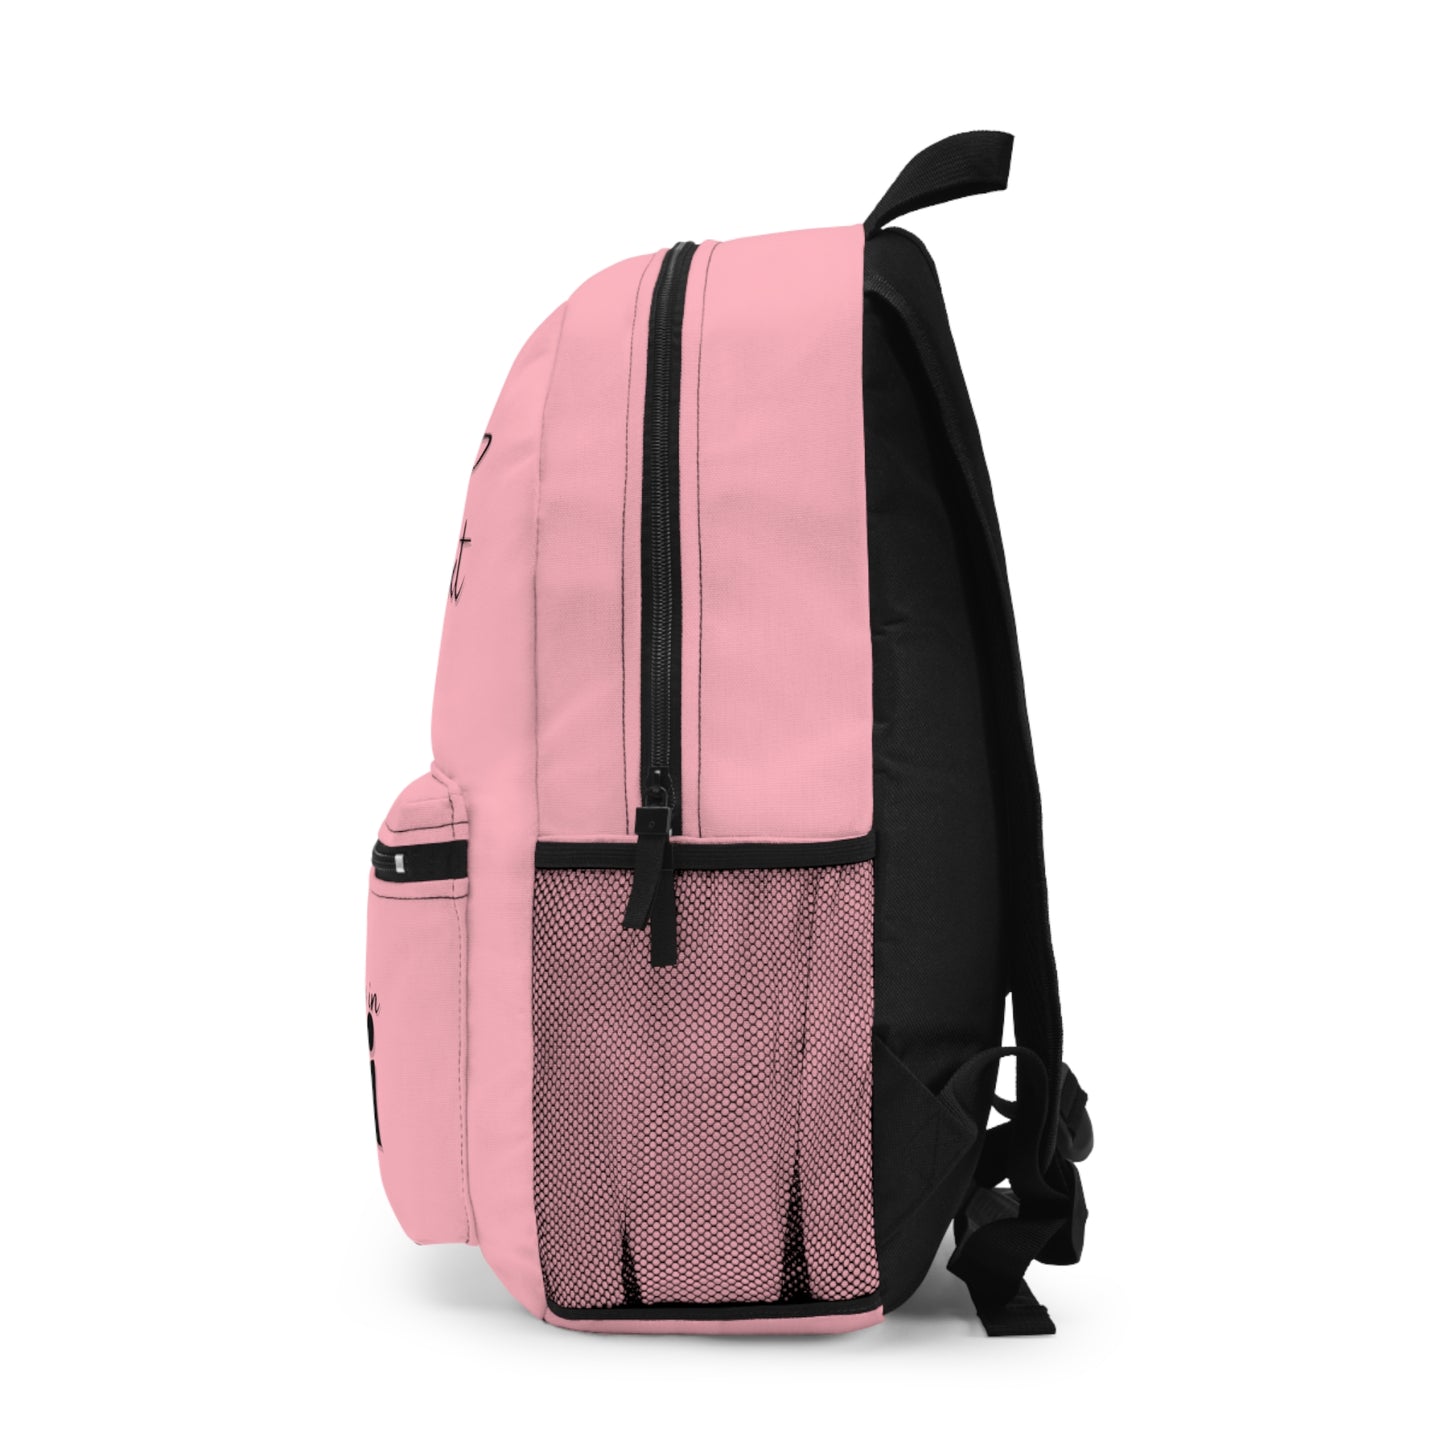 Personalized Making Moves in Pink Miami Backpack